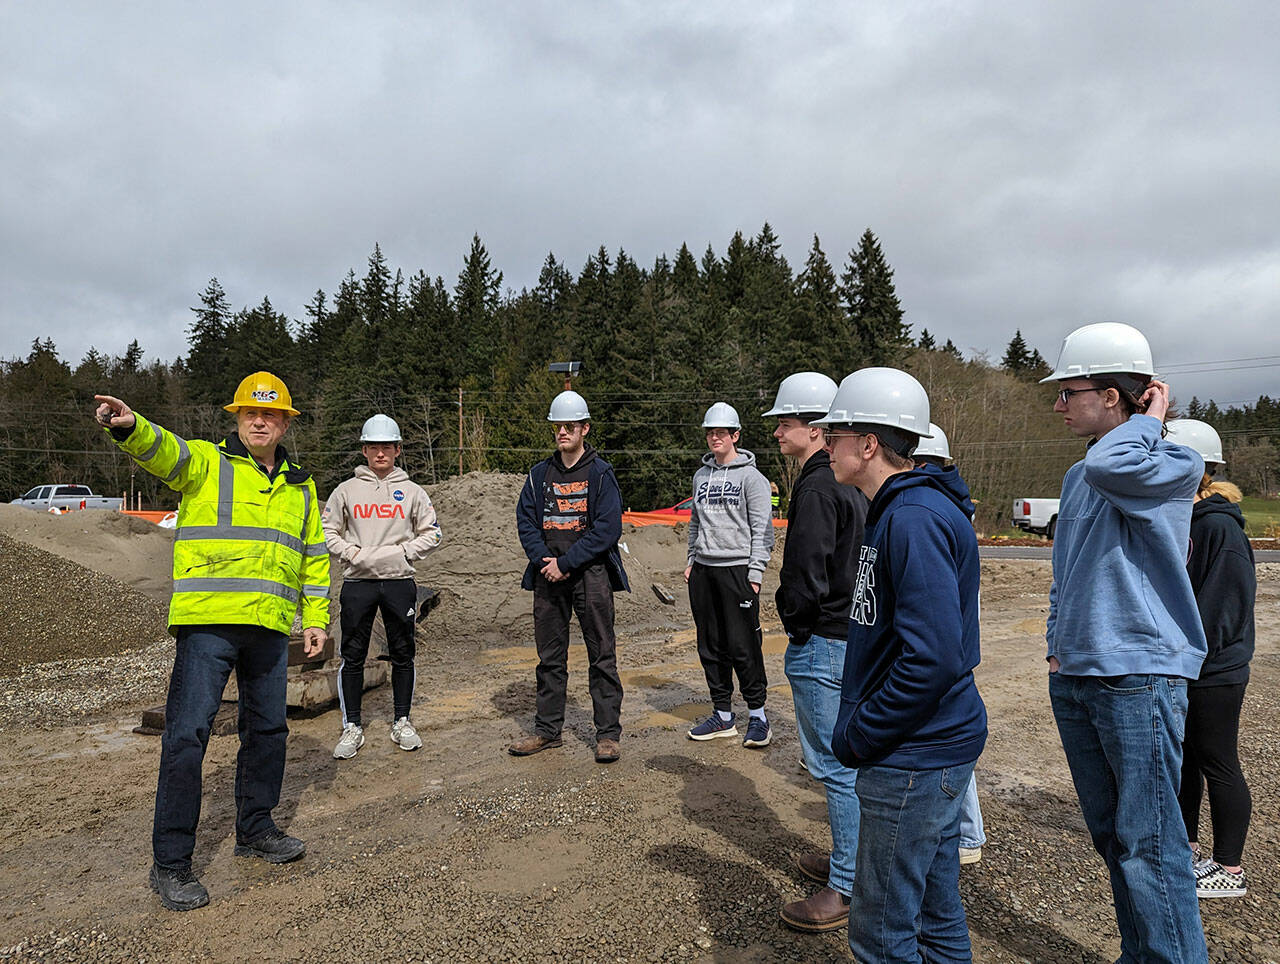 Mark Anspach, Marwood General Construction head of business development, gives the students a site walk. Marwood General Construction courtesy photos